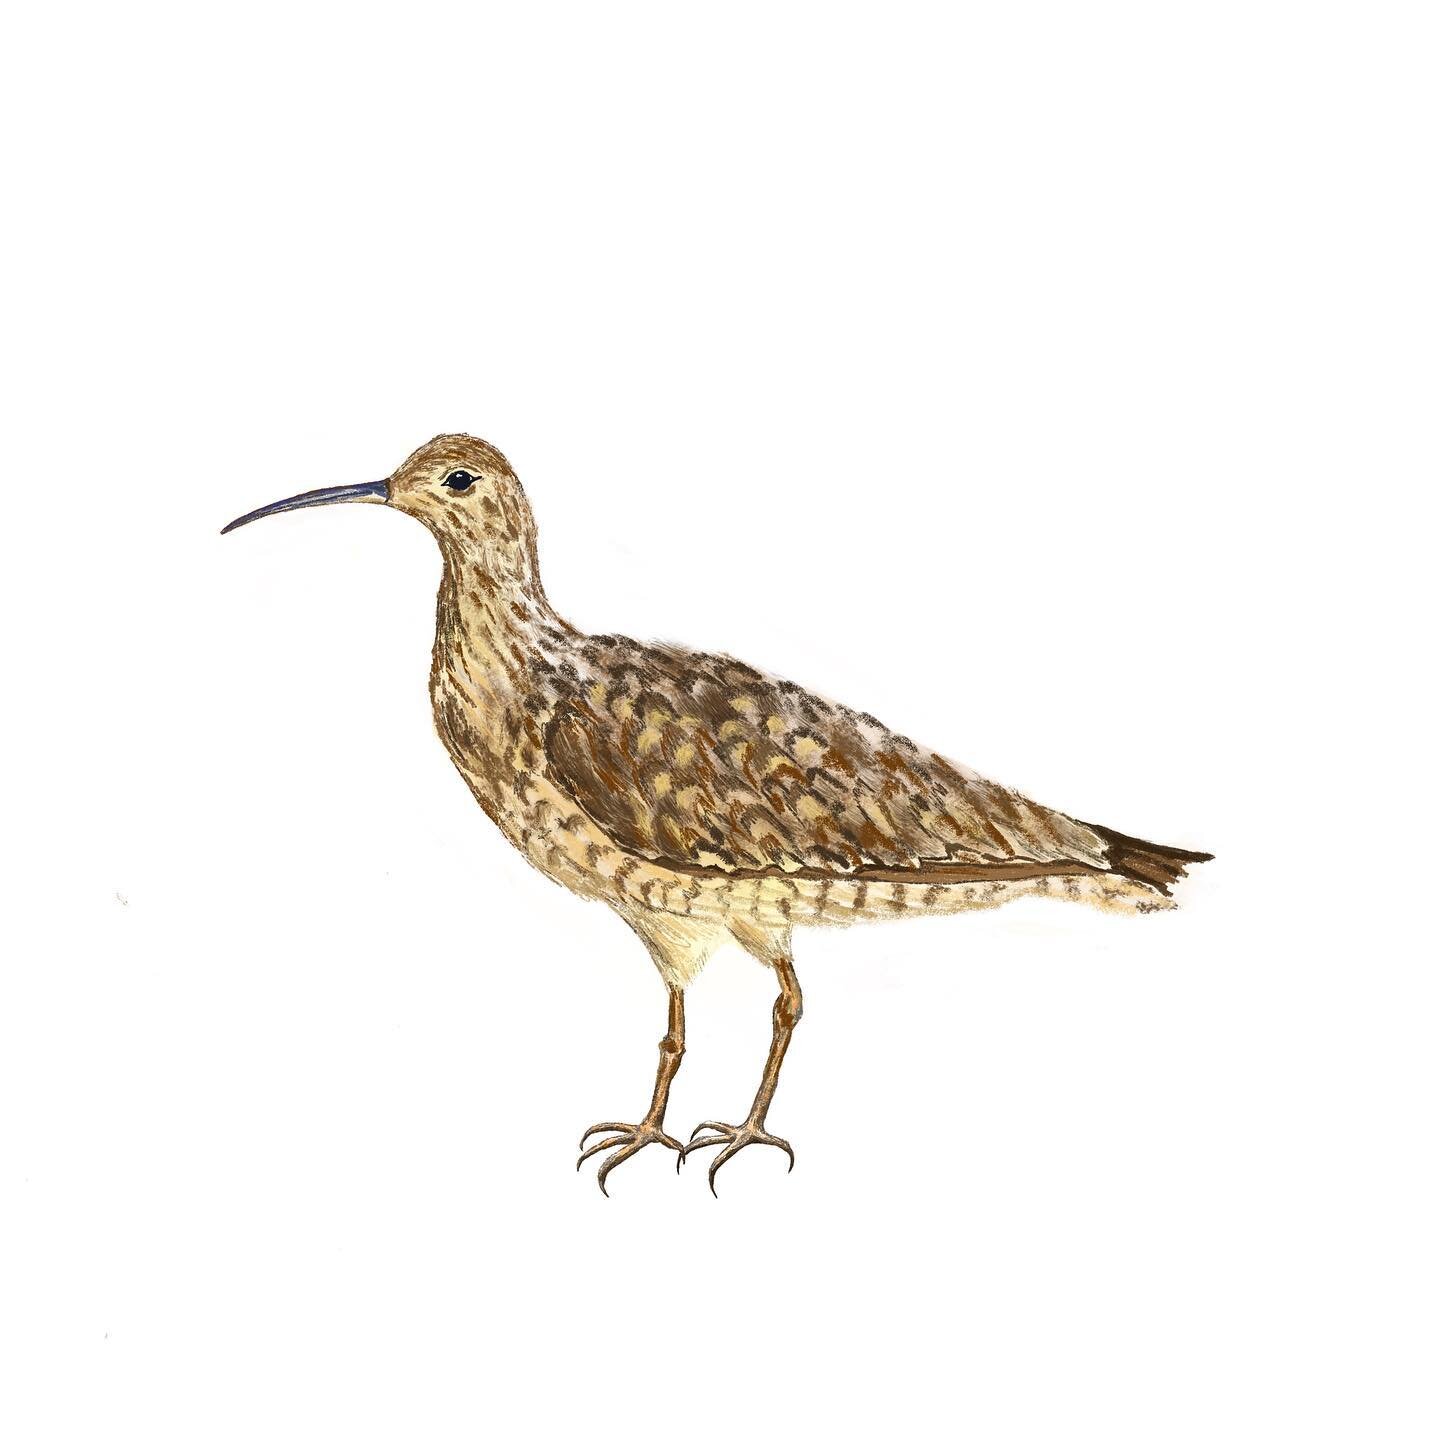 Eskimo Curlew. Critically endangered, presumed extinct. This bird was once the most numerous shorebird in the tundra of Alaska and Canada. The species suffered under un-regulated hunting in the late 19th century and was never able to recover, and the